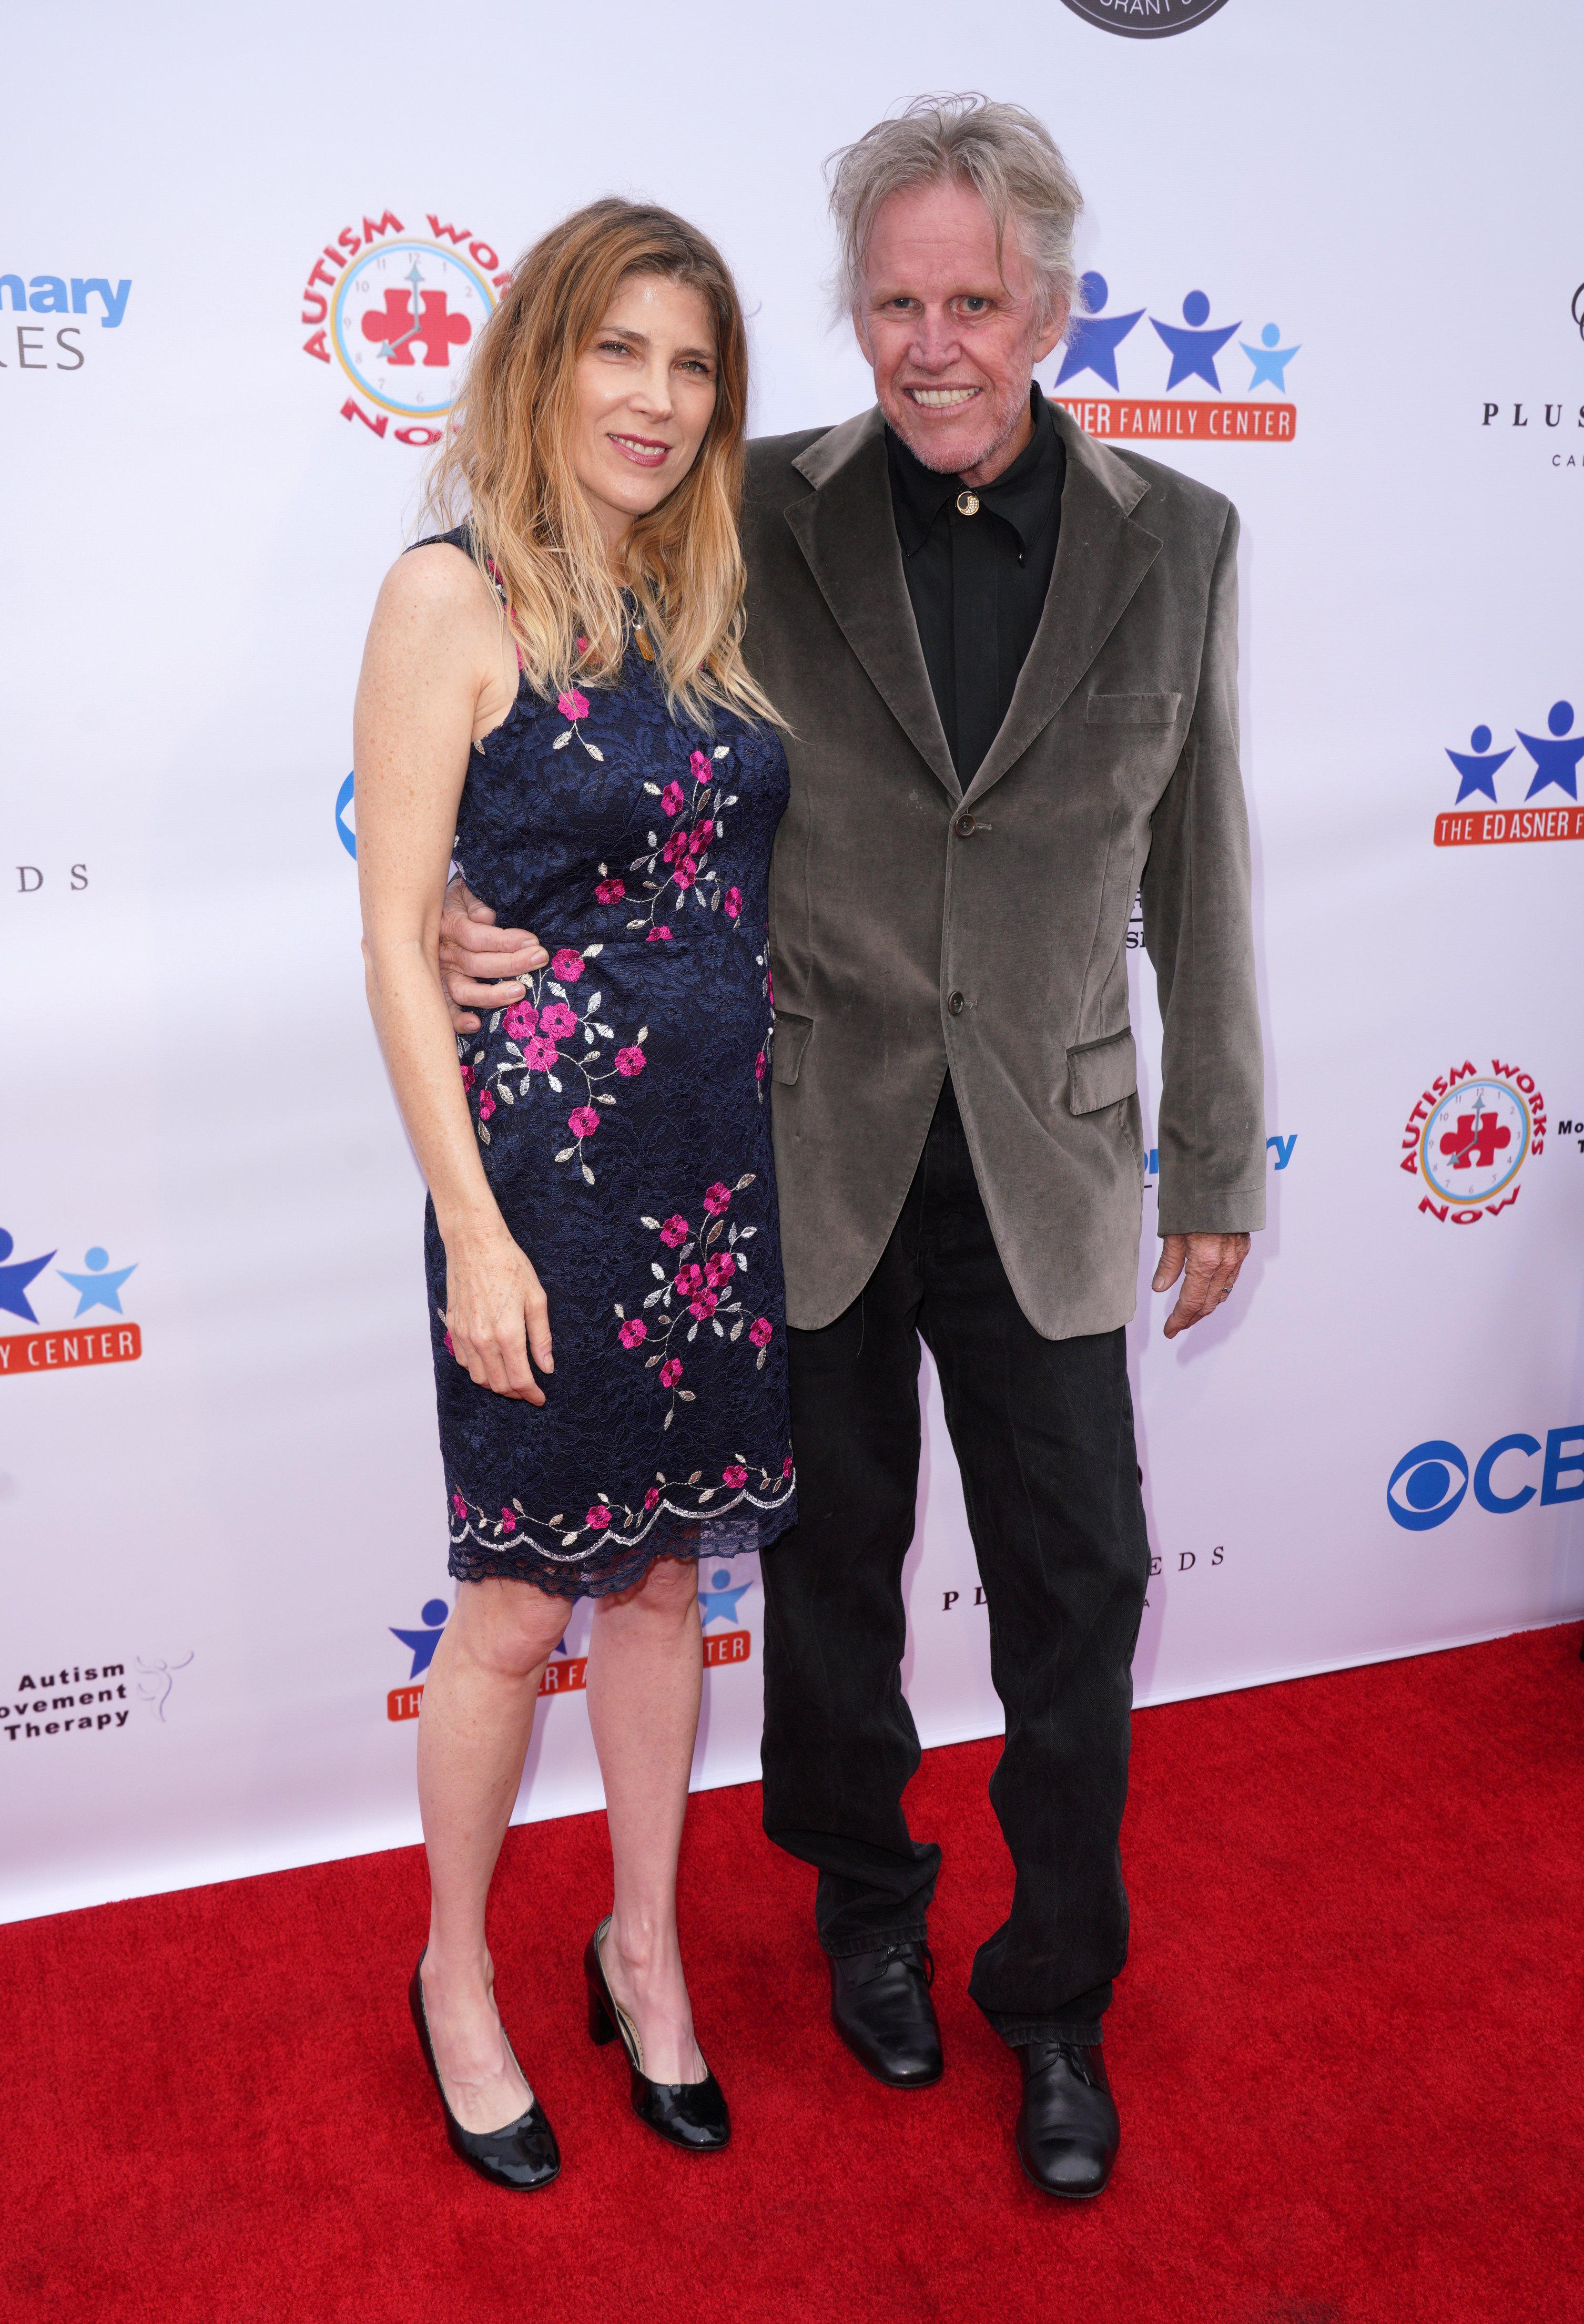 Gary Busey and Steffanie Sampson attend the 7th Annual Ed Asner And Friends Poker Tournament Celebrity Night at CBS Studios - Radford on June 1, 2019 in Studio City, California. | Source: Getty Images